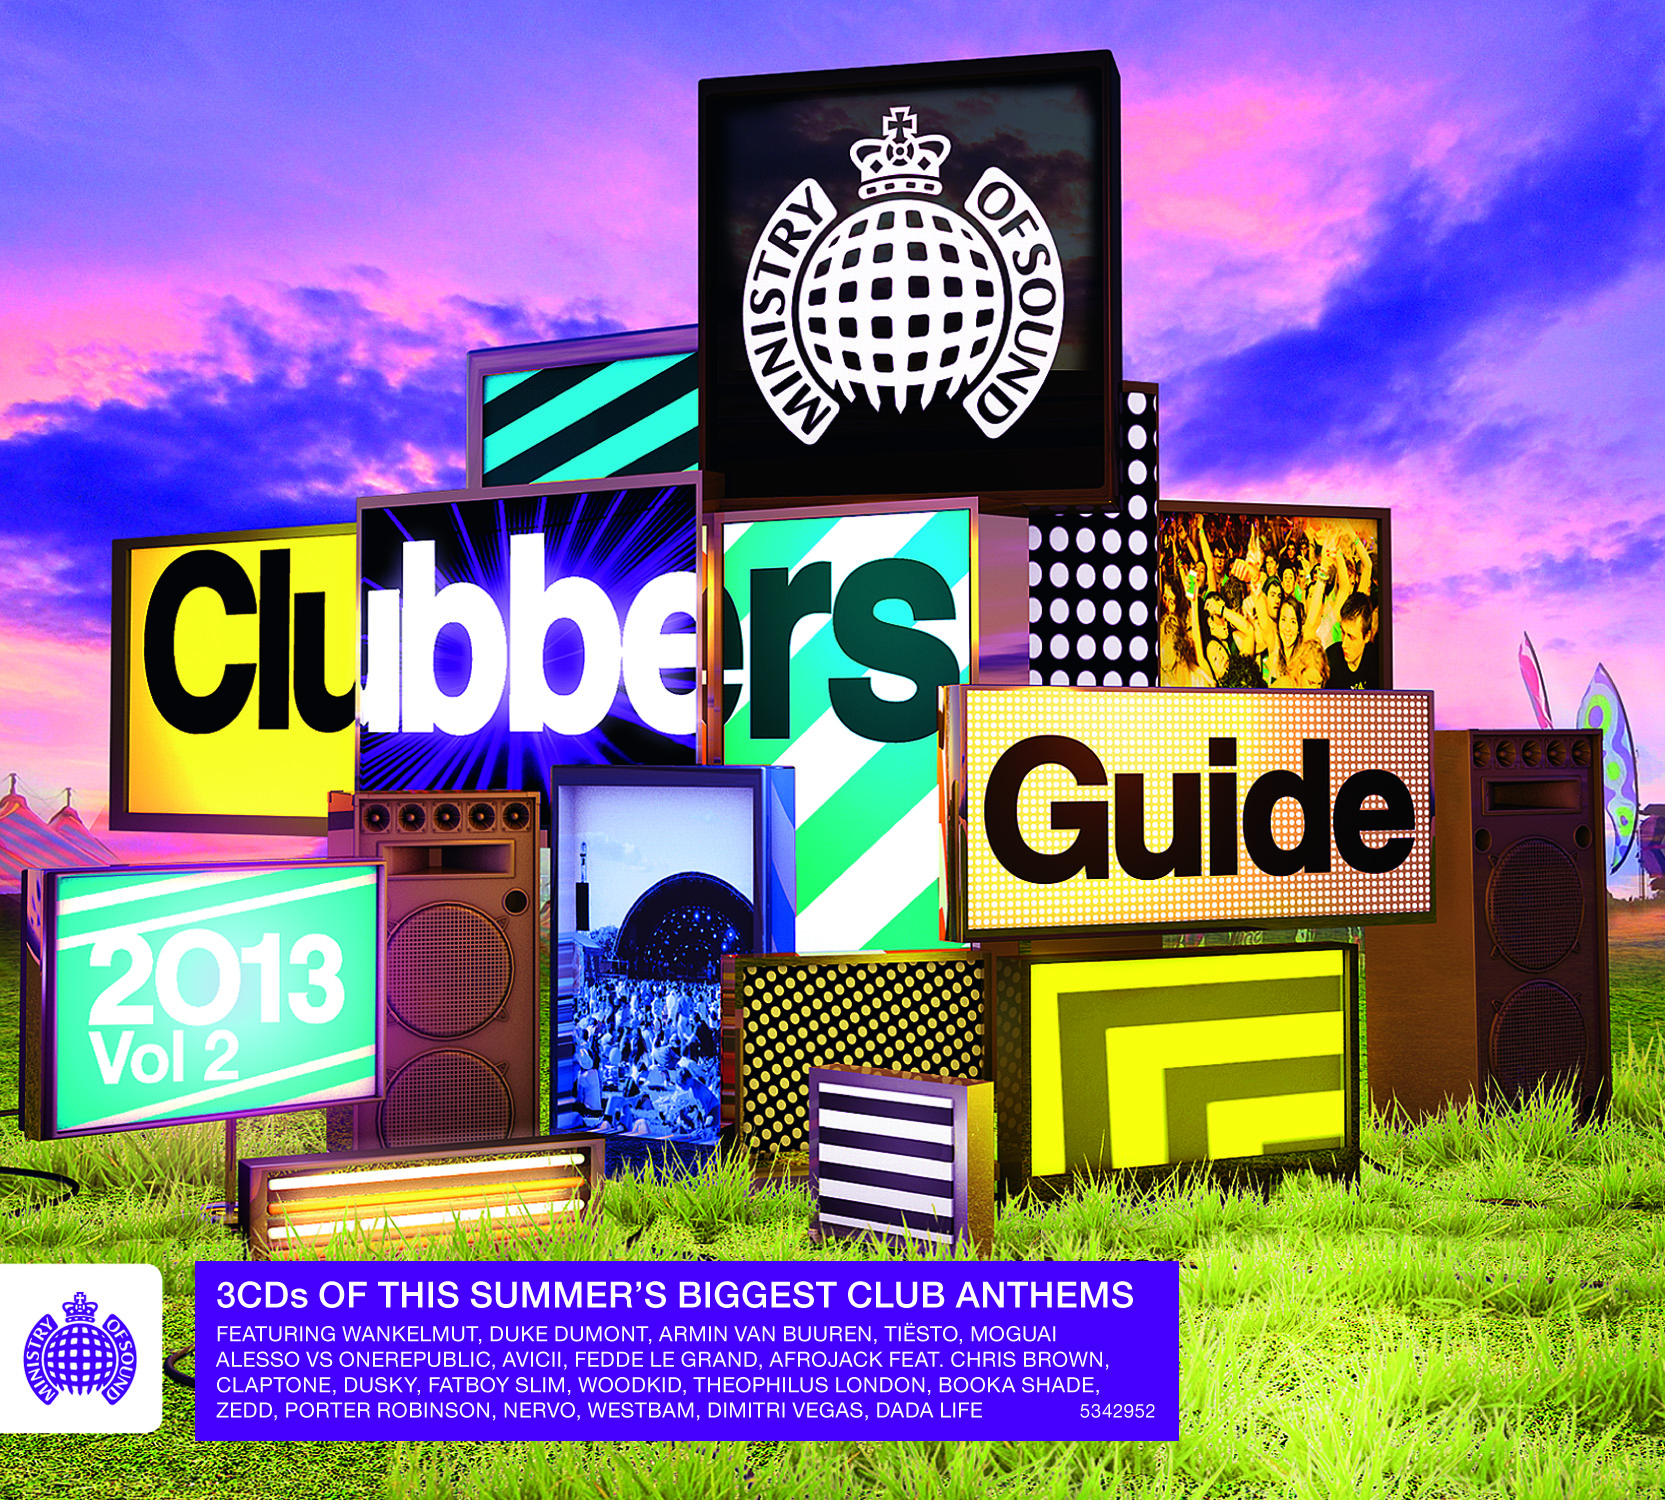 Ministry Of Sound: Clubbers Guide 2013 Vol. 2